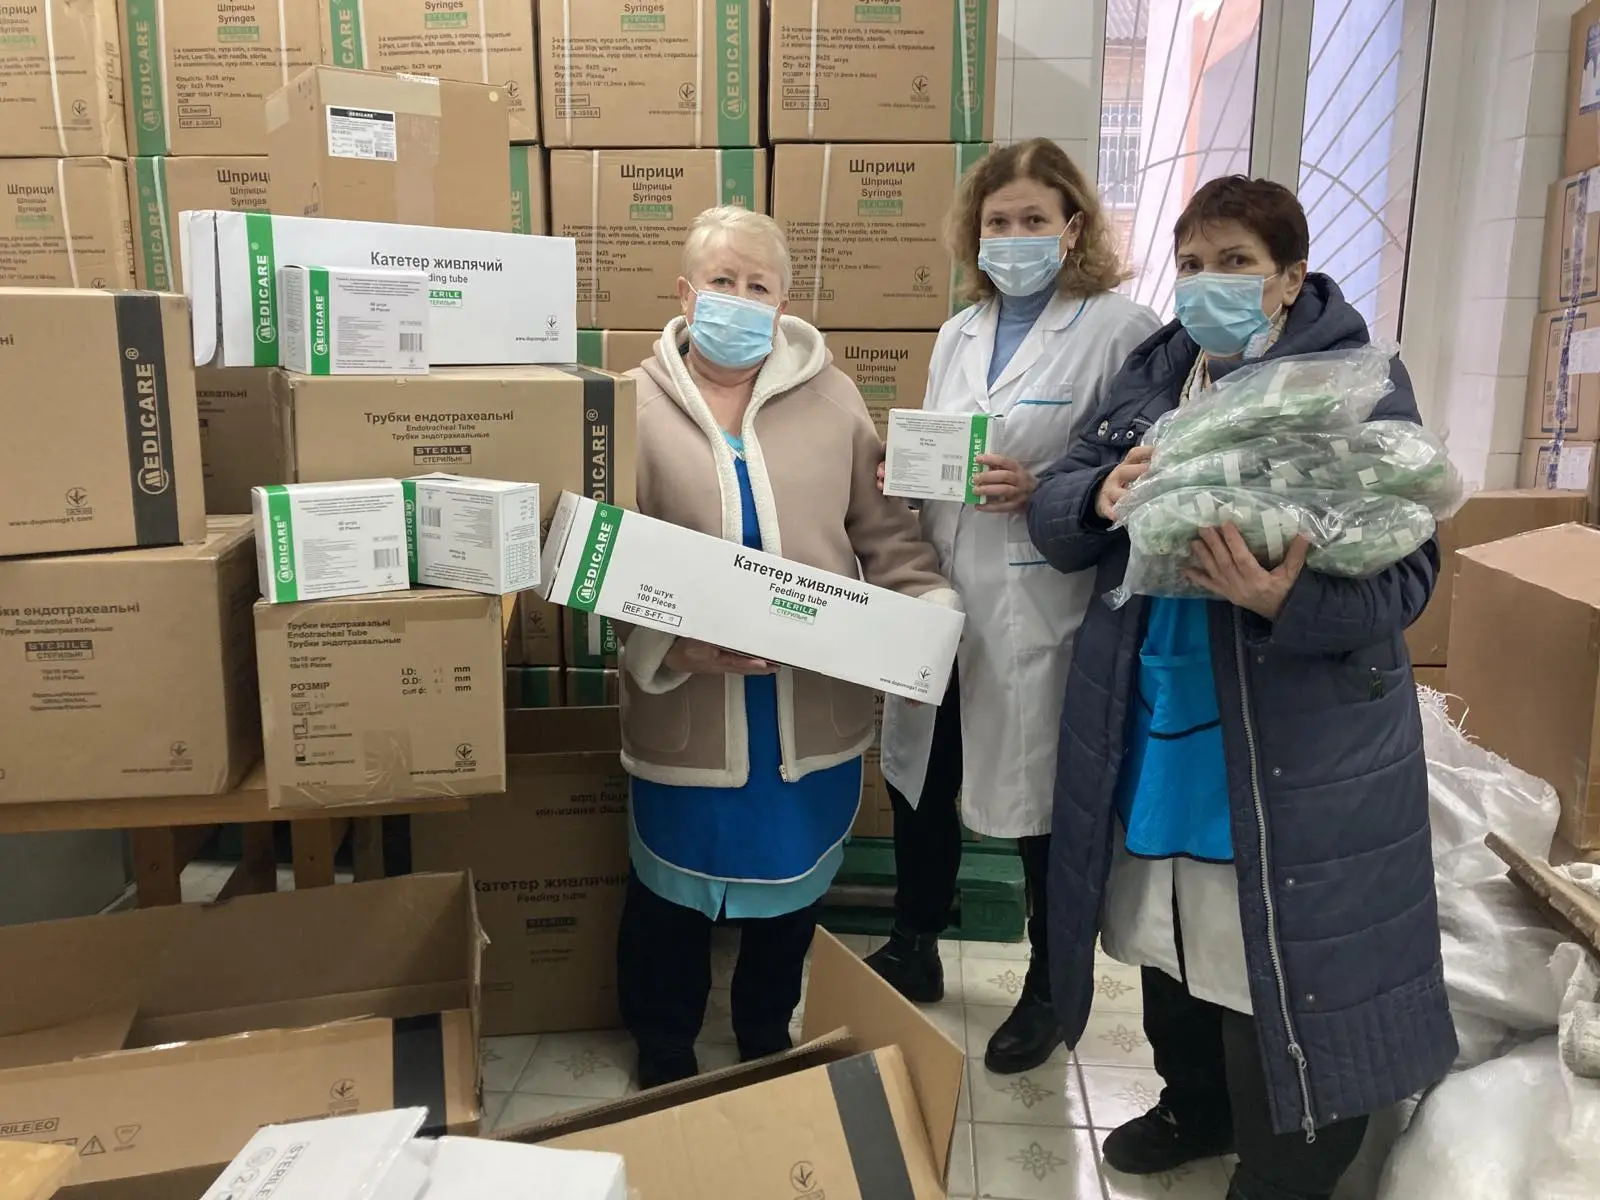 Three heart volunteers are supporting medical care in Ukraine